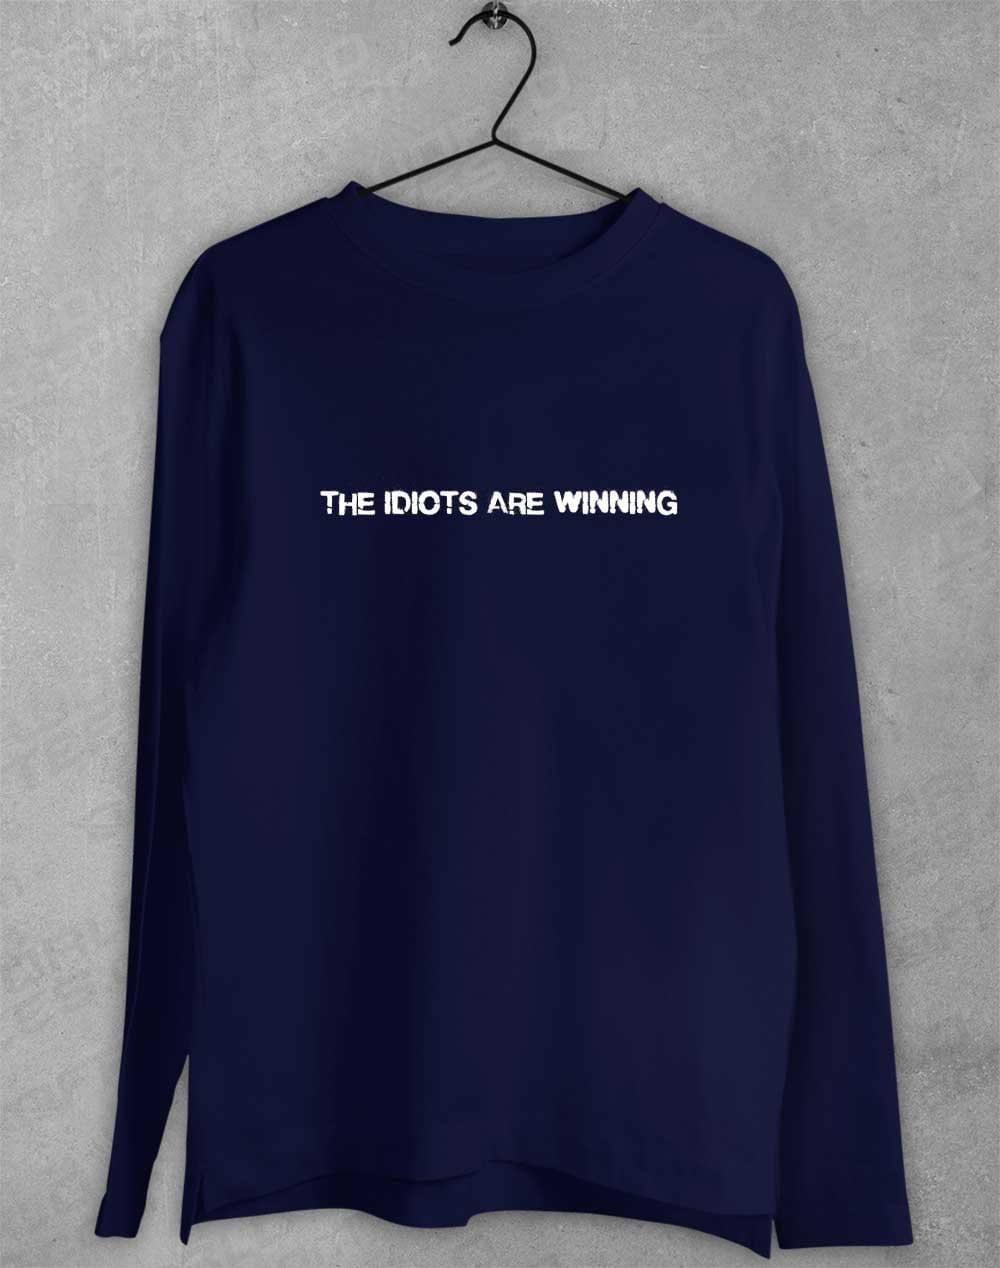 The Idiots Are Winning Long Sleeve T-Shirt S / Navy  - Off World Tees